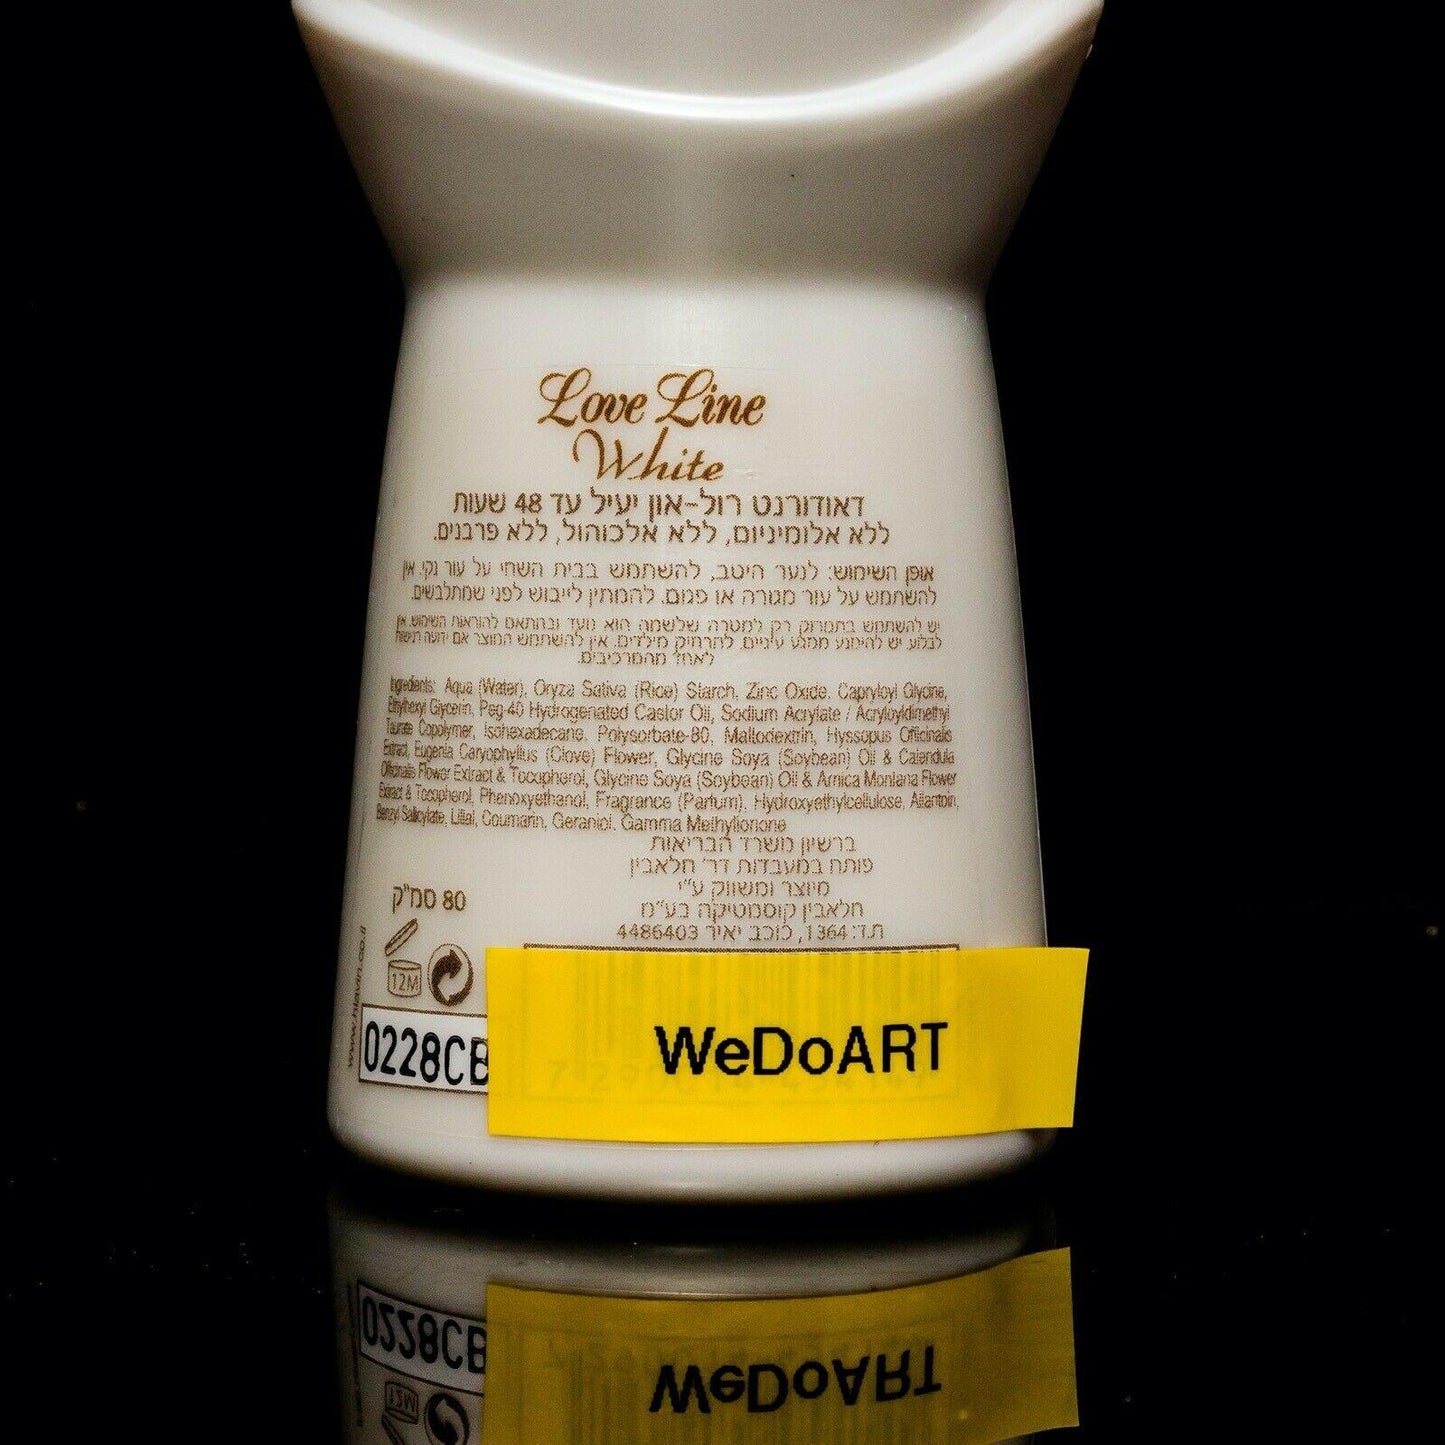 Roll-On Deodorant White 48 Hours Protection - WEDOART-IL